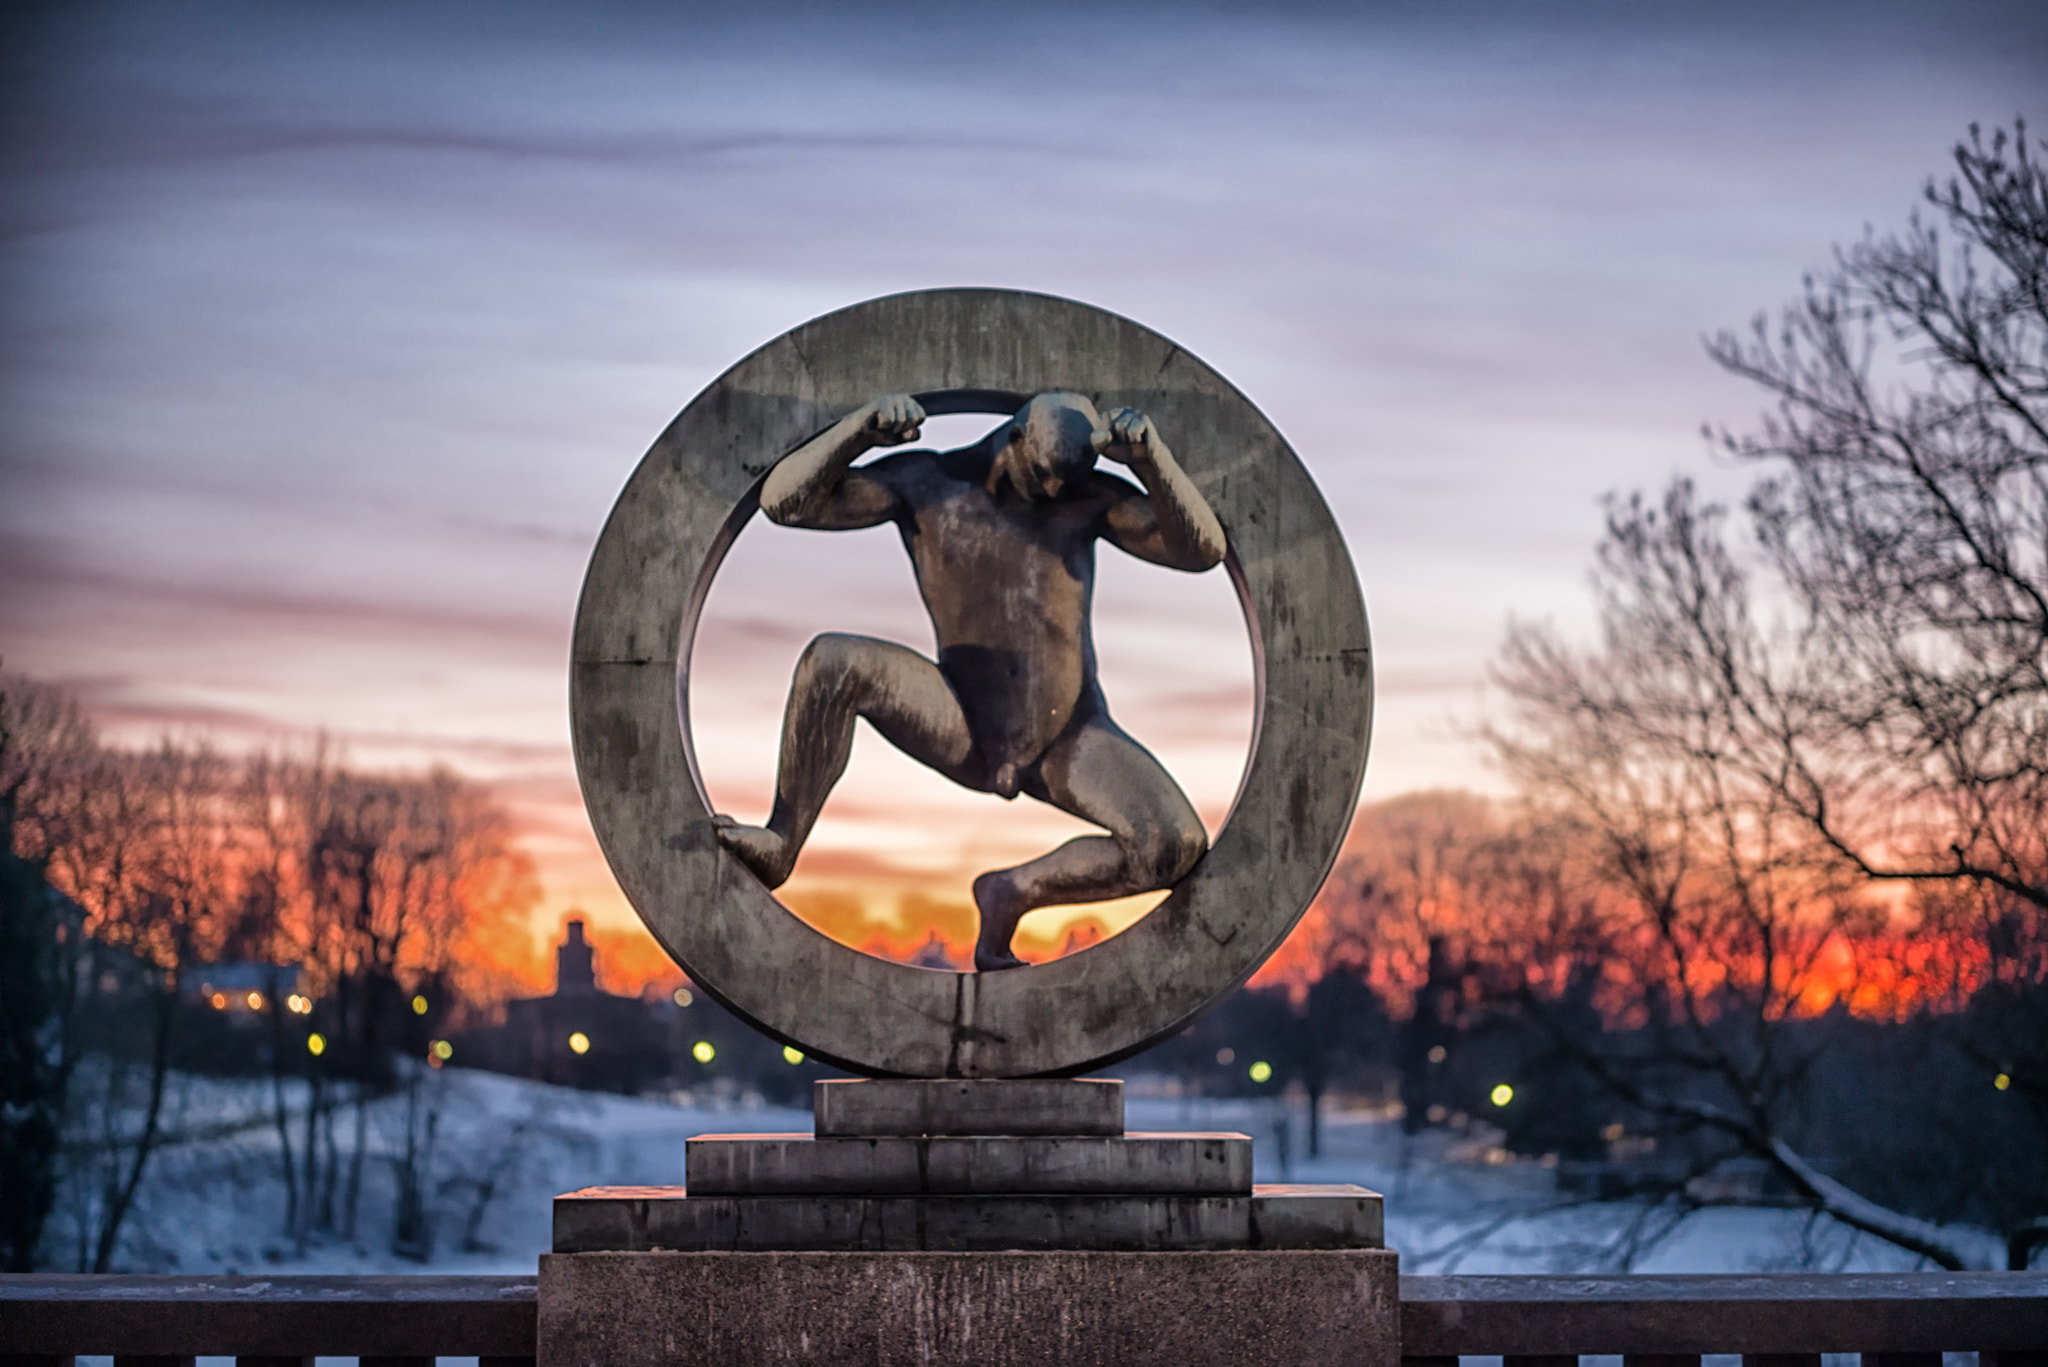 ZEISS Otus 55mm F1.4 sample photo. The vigeland park photography